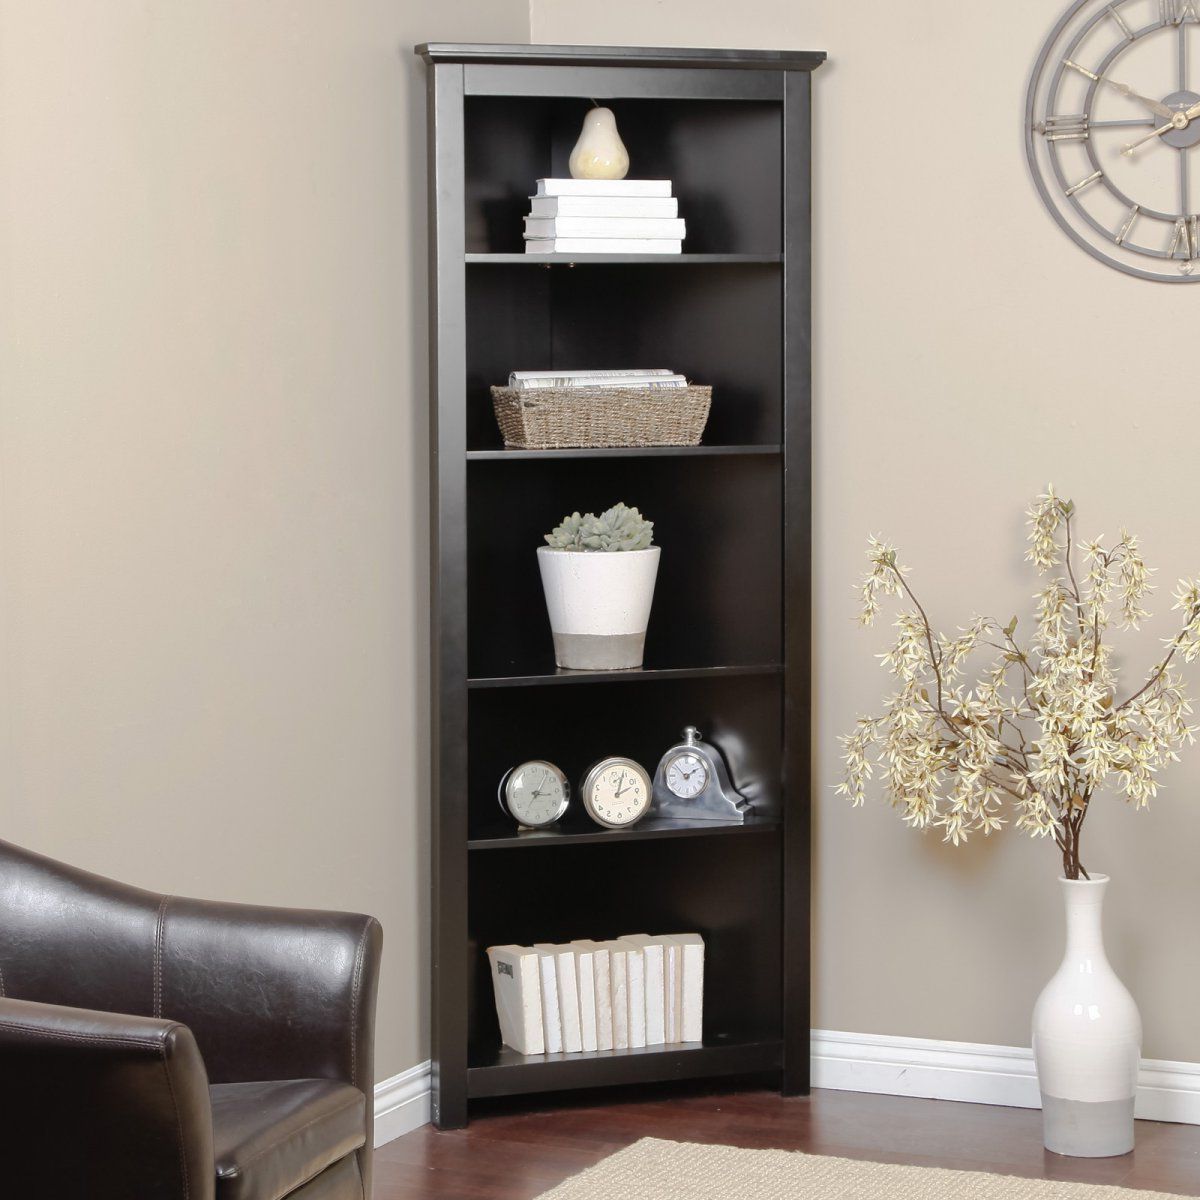 Redford Black Corner Bookcase – Corner Bookcases At Book With Regard To Most Current Ardenvor Corner Bookcases (View 12 of 20)